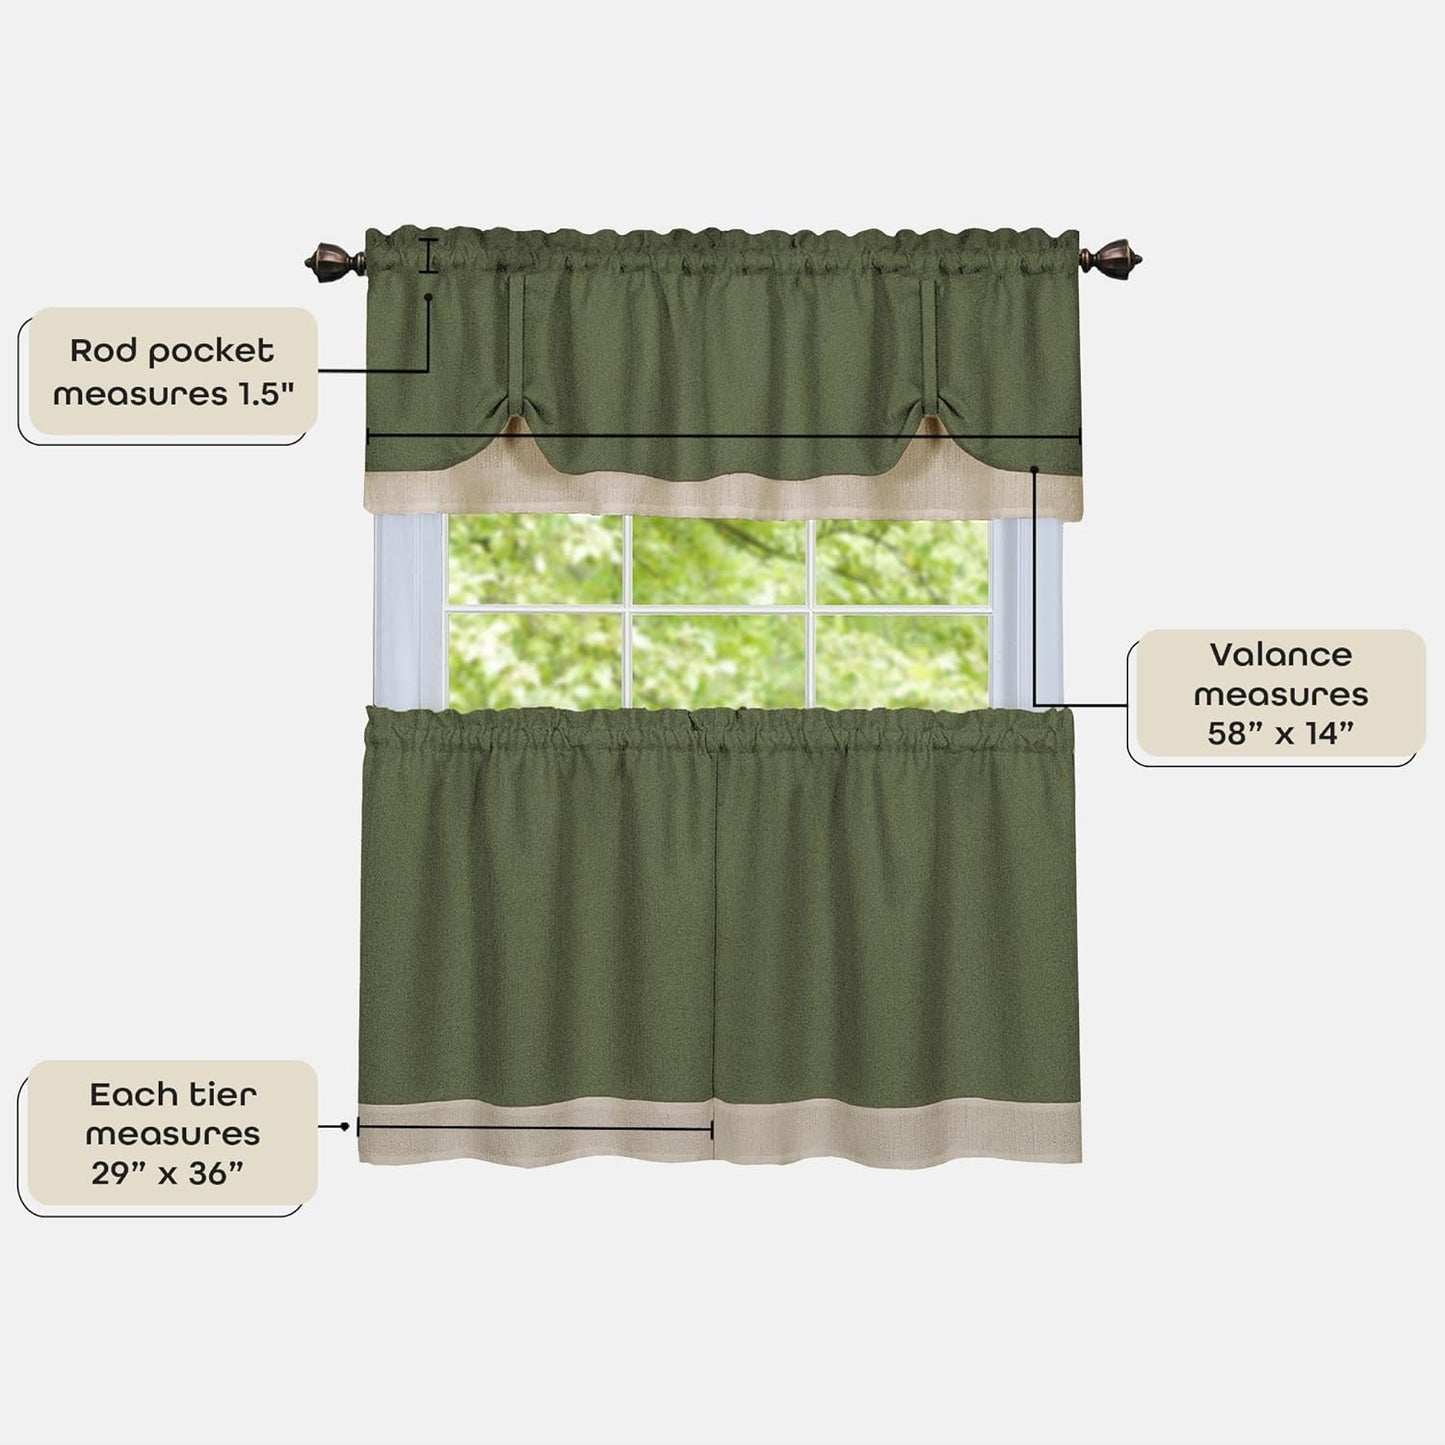 Darcy (Green/Camel) Tier and Valance Window Curtain Set - 58 Inch Width, 36 Inch Length - Light Filtering Drapes for Kitchen, Bedroom, Living & Dining Room by Achim Home Decor